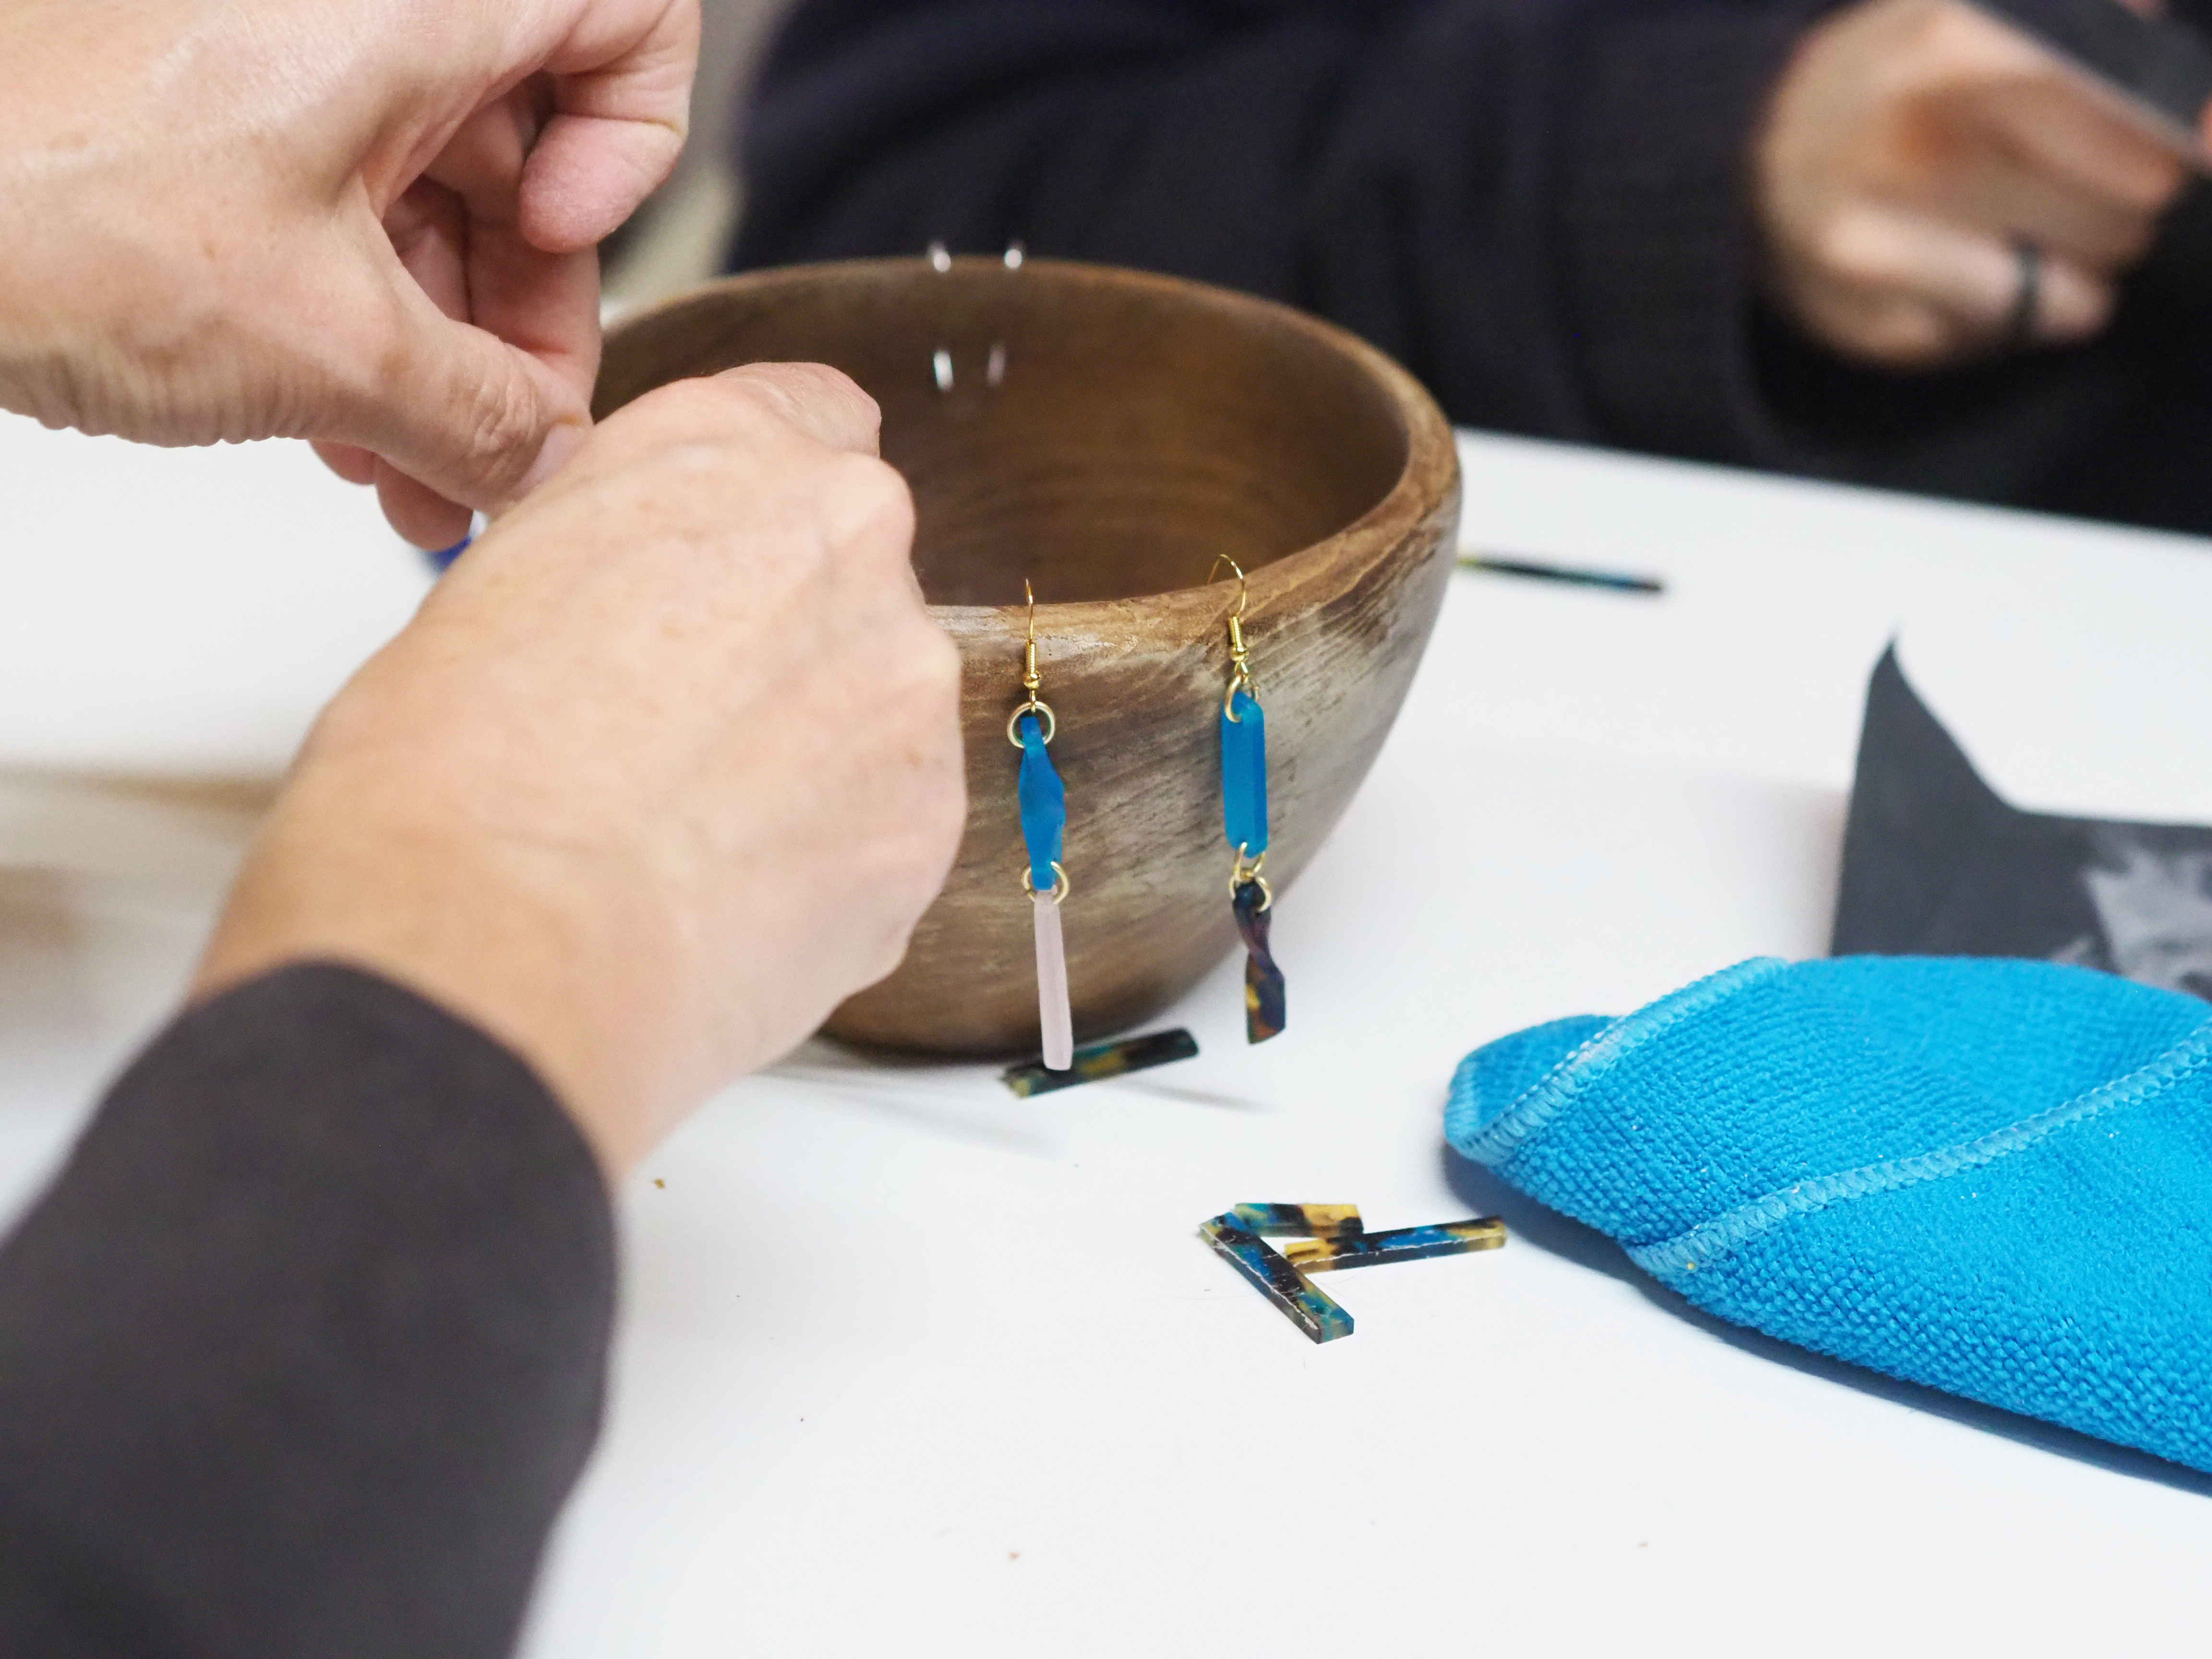 Social enterprise Pivot to host Mother’s Day jewellery making workshops to help end homelessness